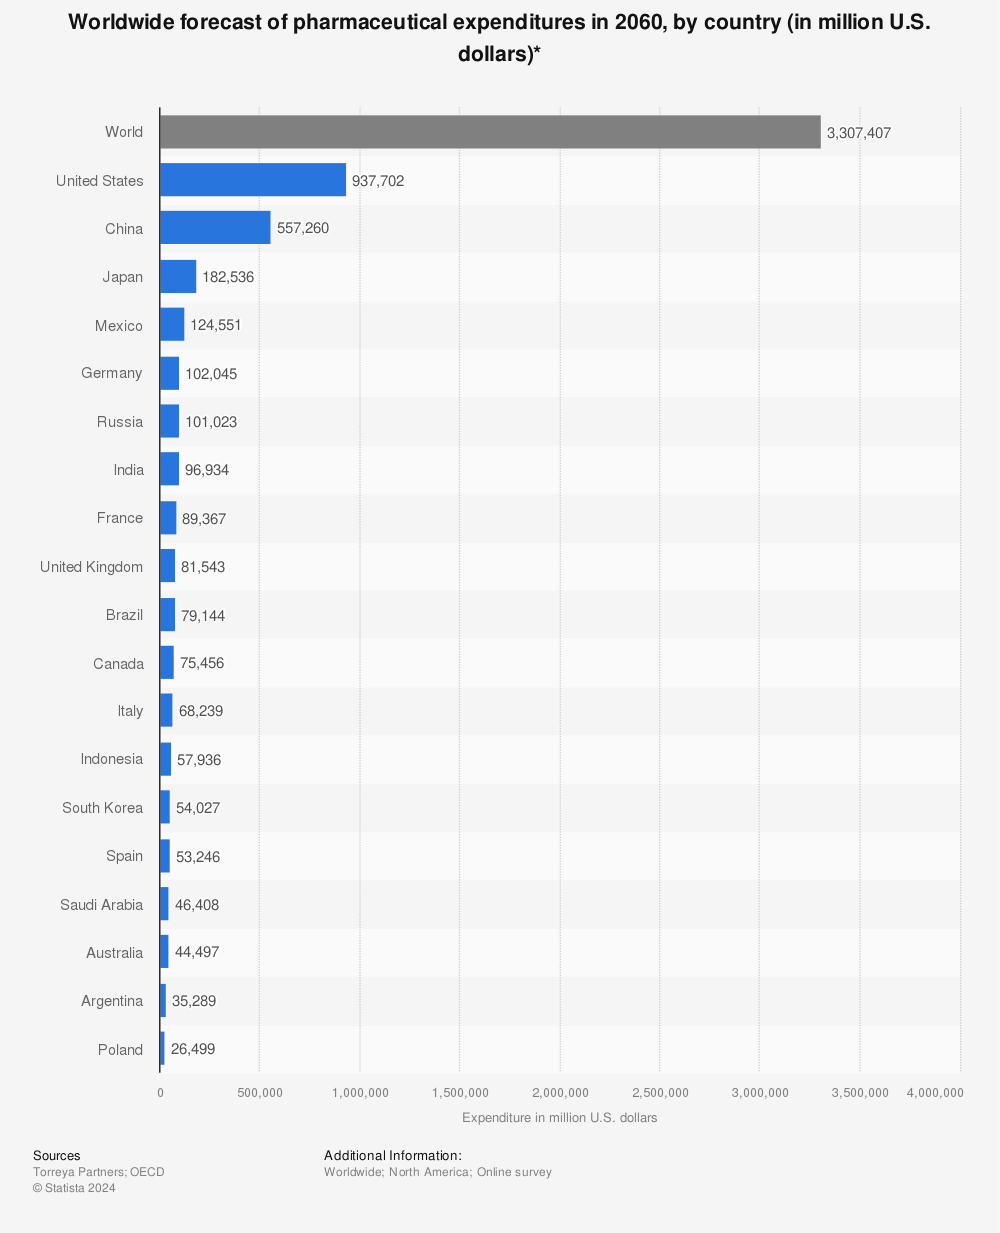 Statistic: Worldwide forecast of pharmaceutical expenditures in 2060, by country (in million U.S. dollars)* | Statista